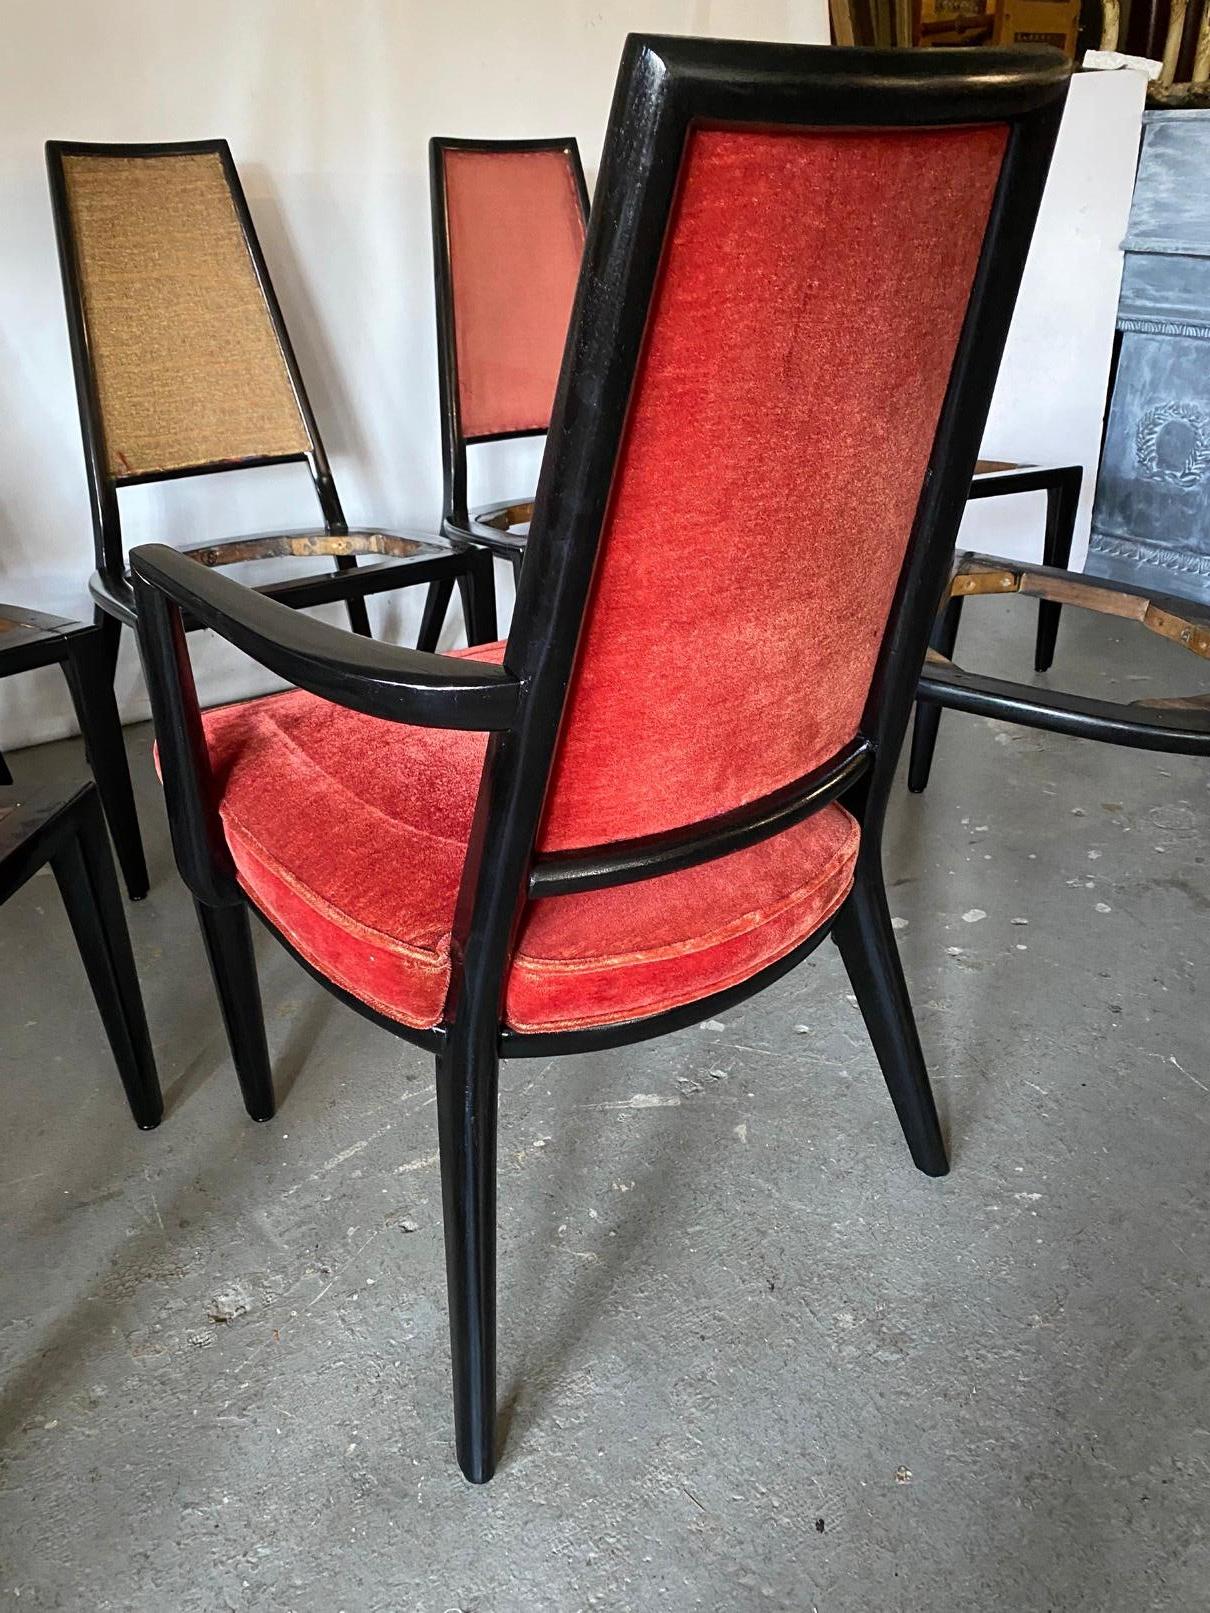 Set of 8 Art Deco high back dining chairs with 2 armchairs and 6 side chairs. These chairs are ready for you to add your own fabric and make them fabulous. Chair frames are in excellent solid condition. Lovingly restored to its original glory.